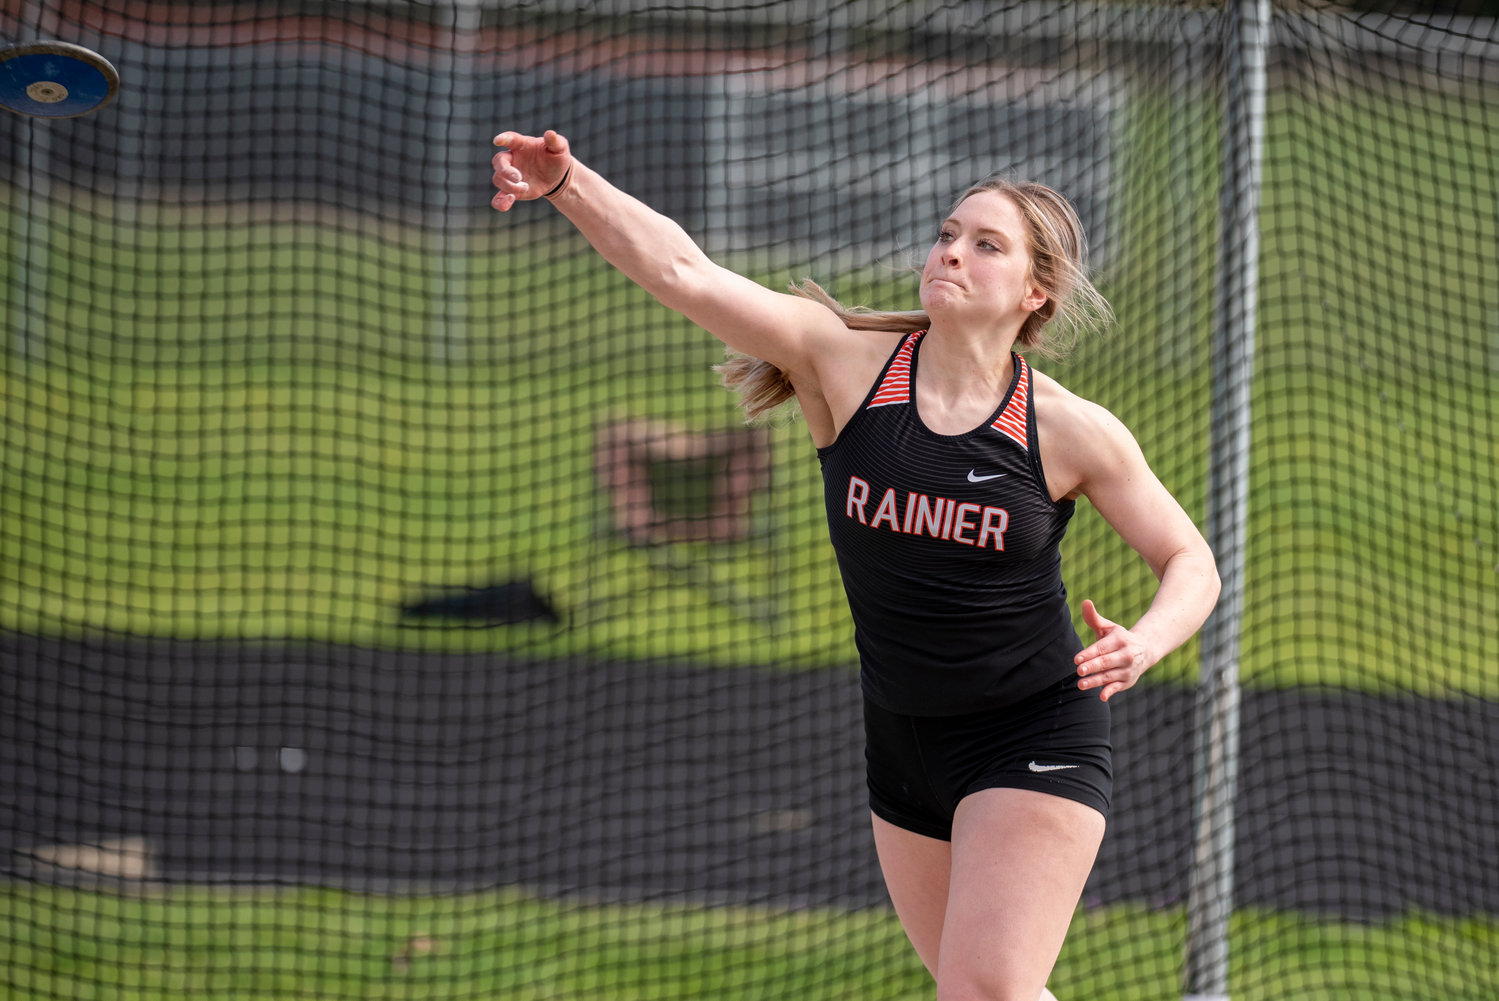 Rainier senior Isabella Holmes unleashes the discus during a track and field meet at Napavine on March 31.